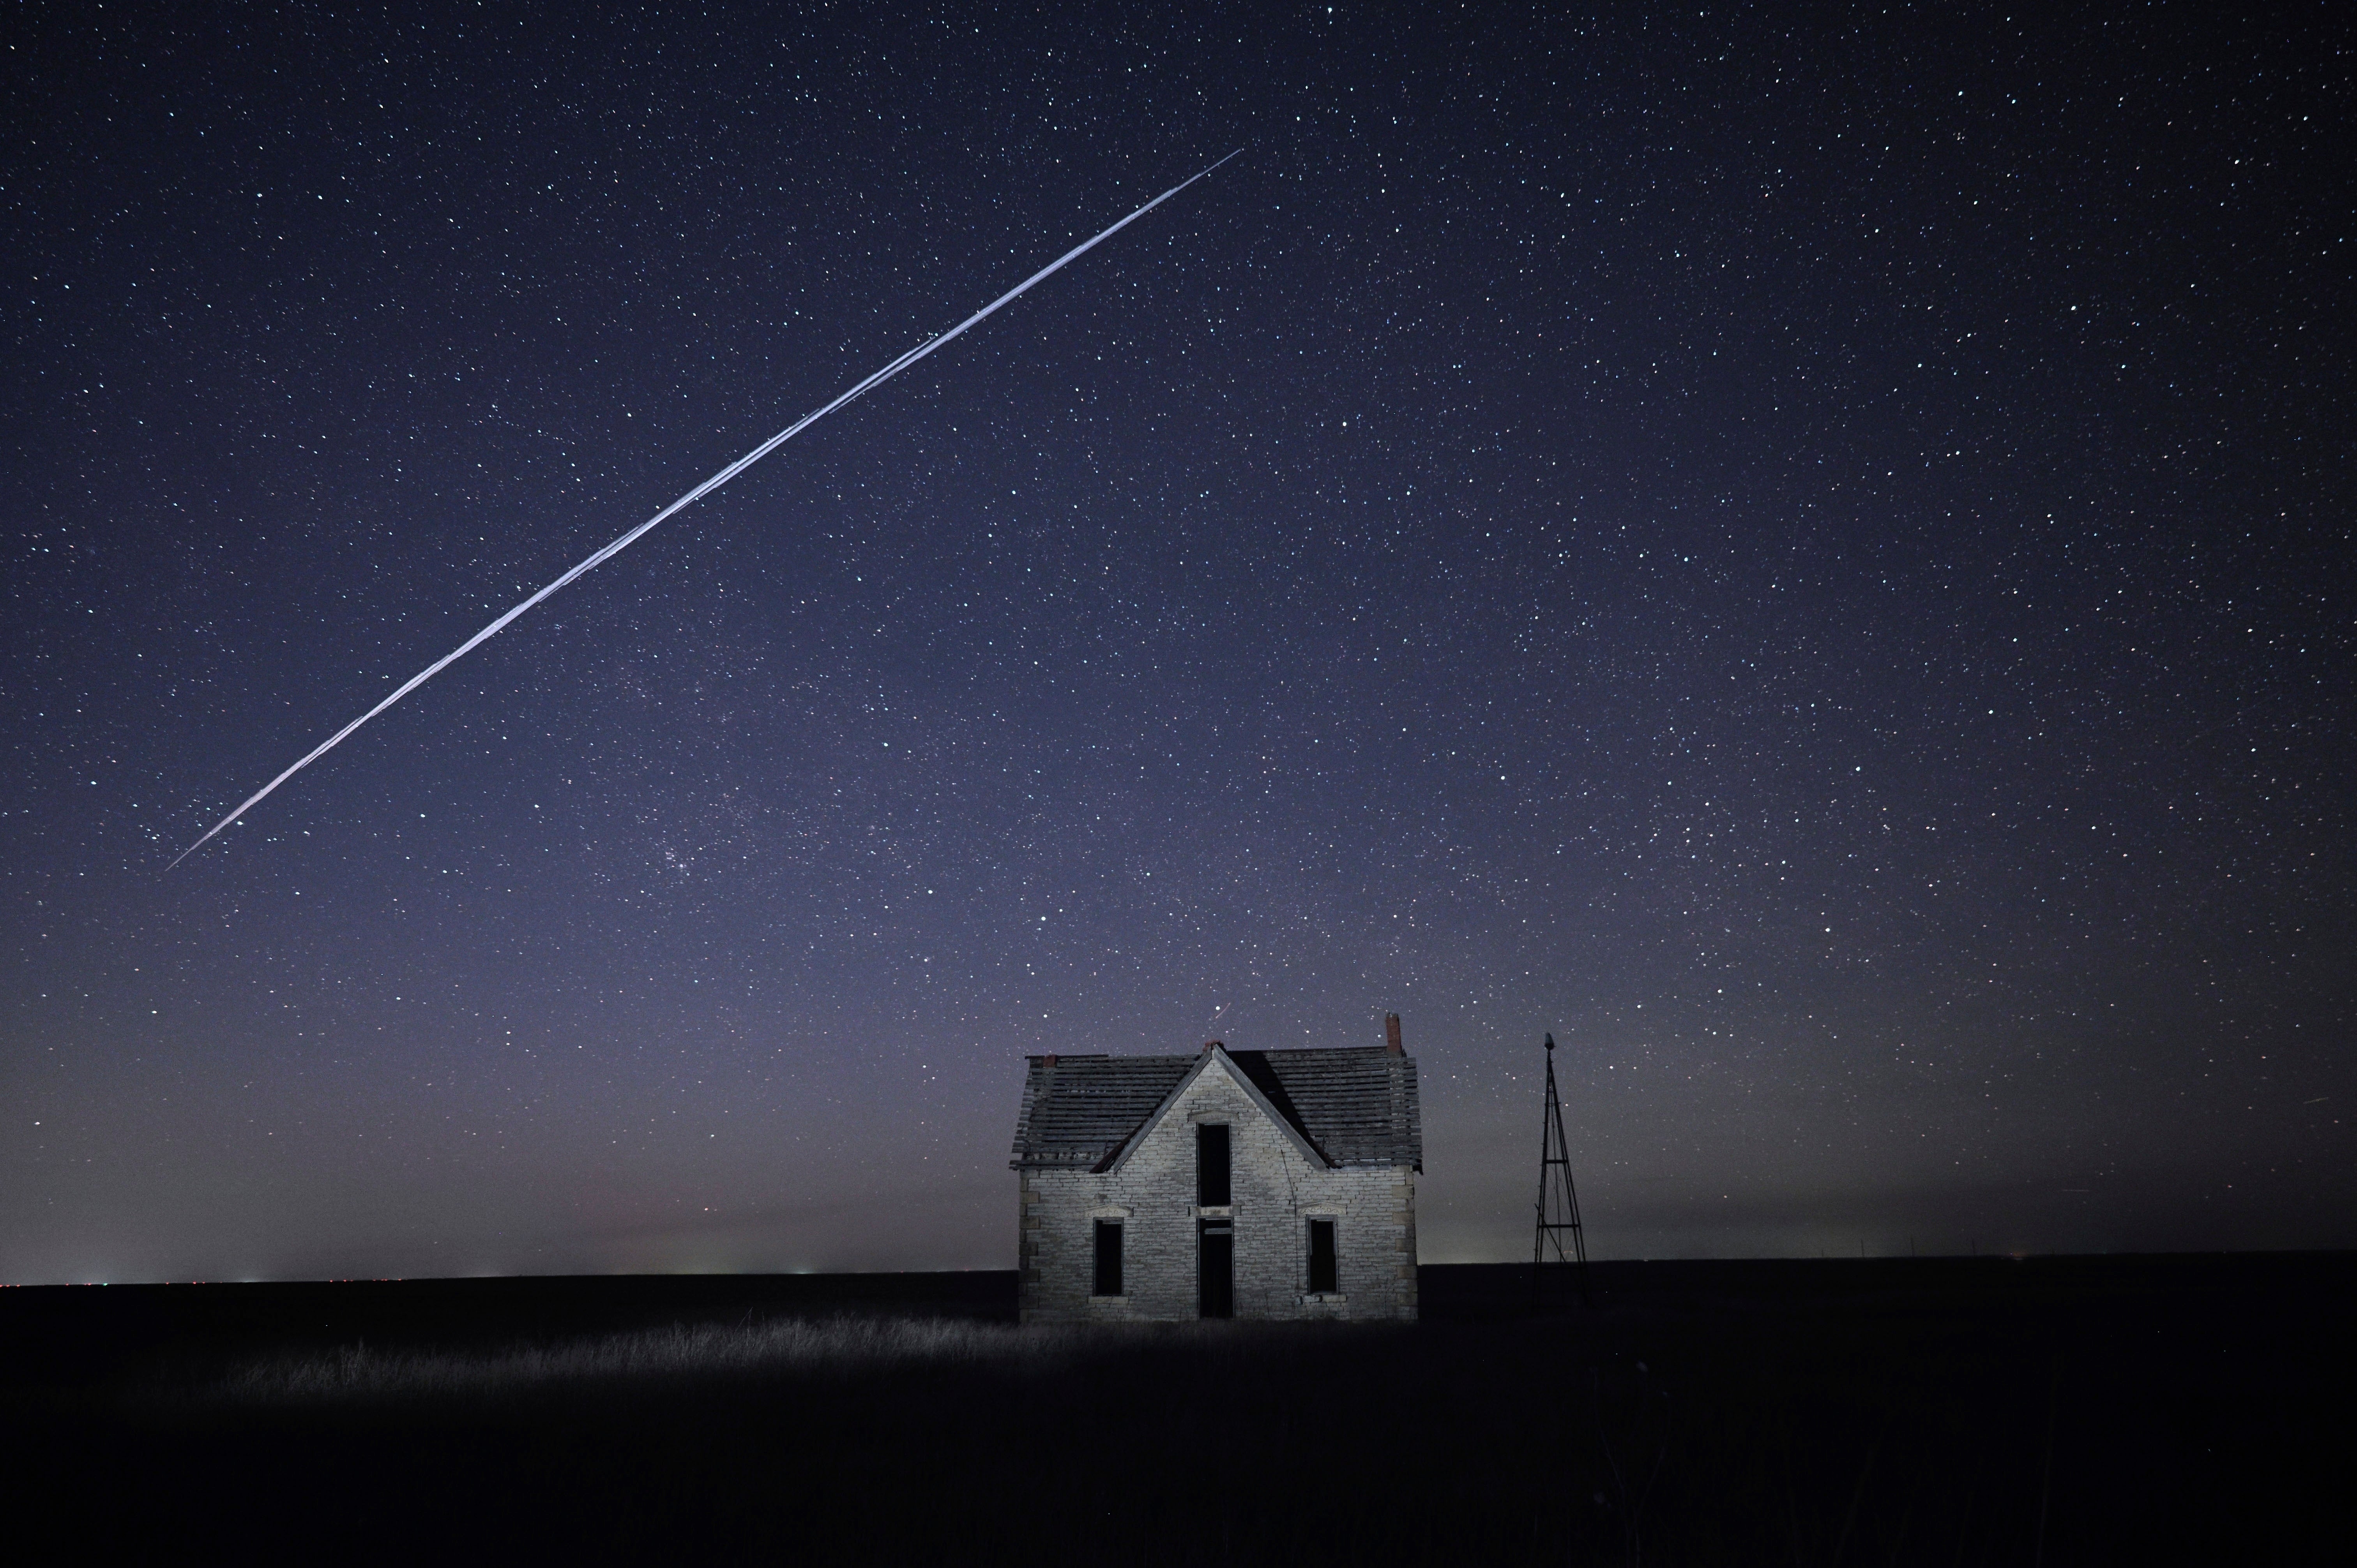 A string of SpaceX Starlink satellites passes over an old stone house near Florence, Kansas, 6 May, 2021